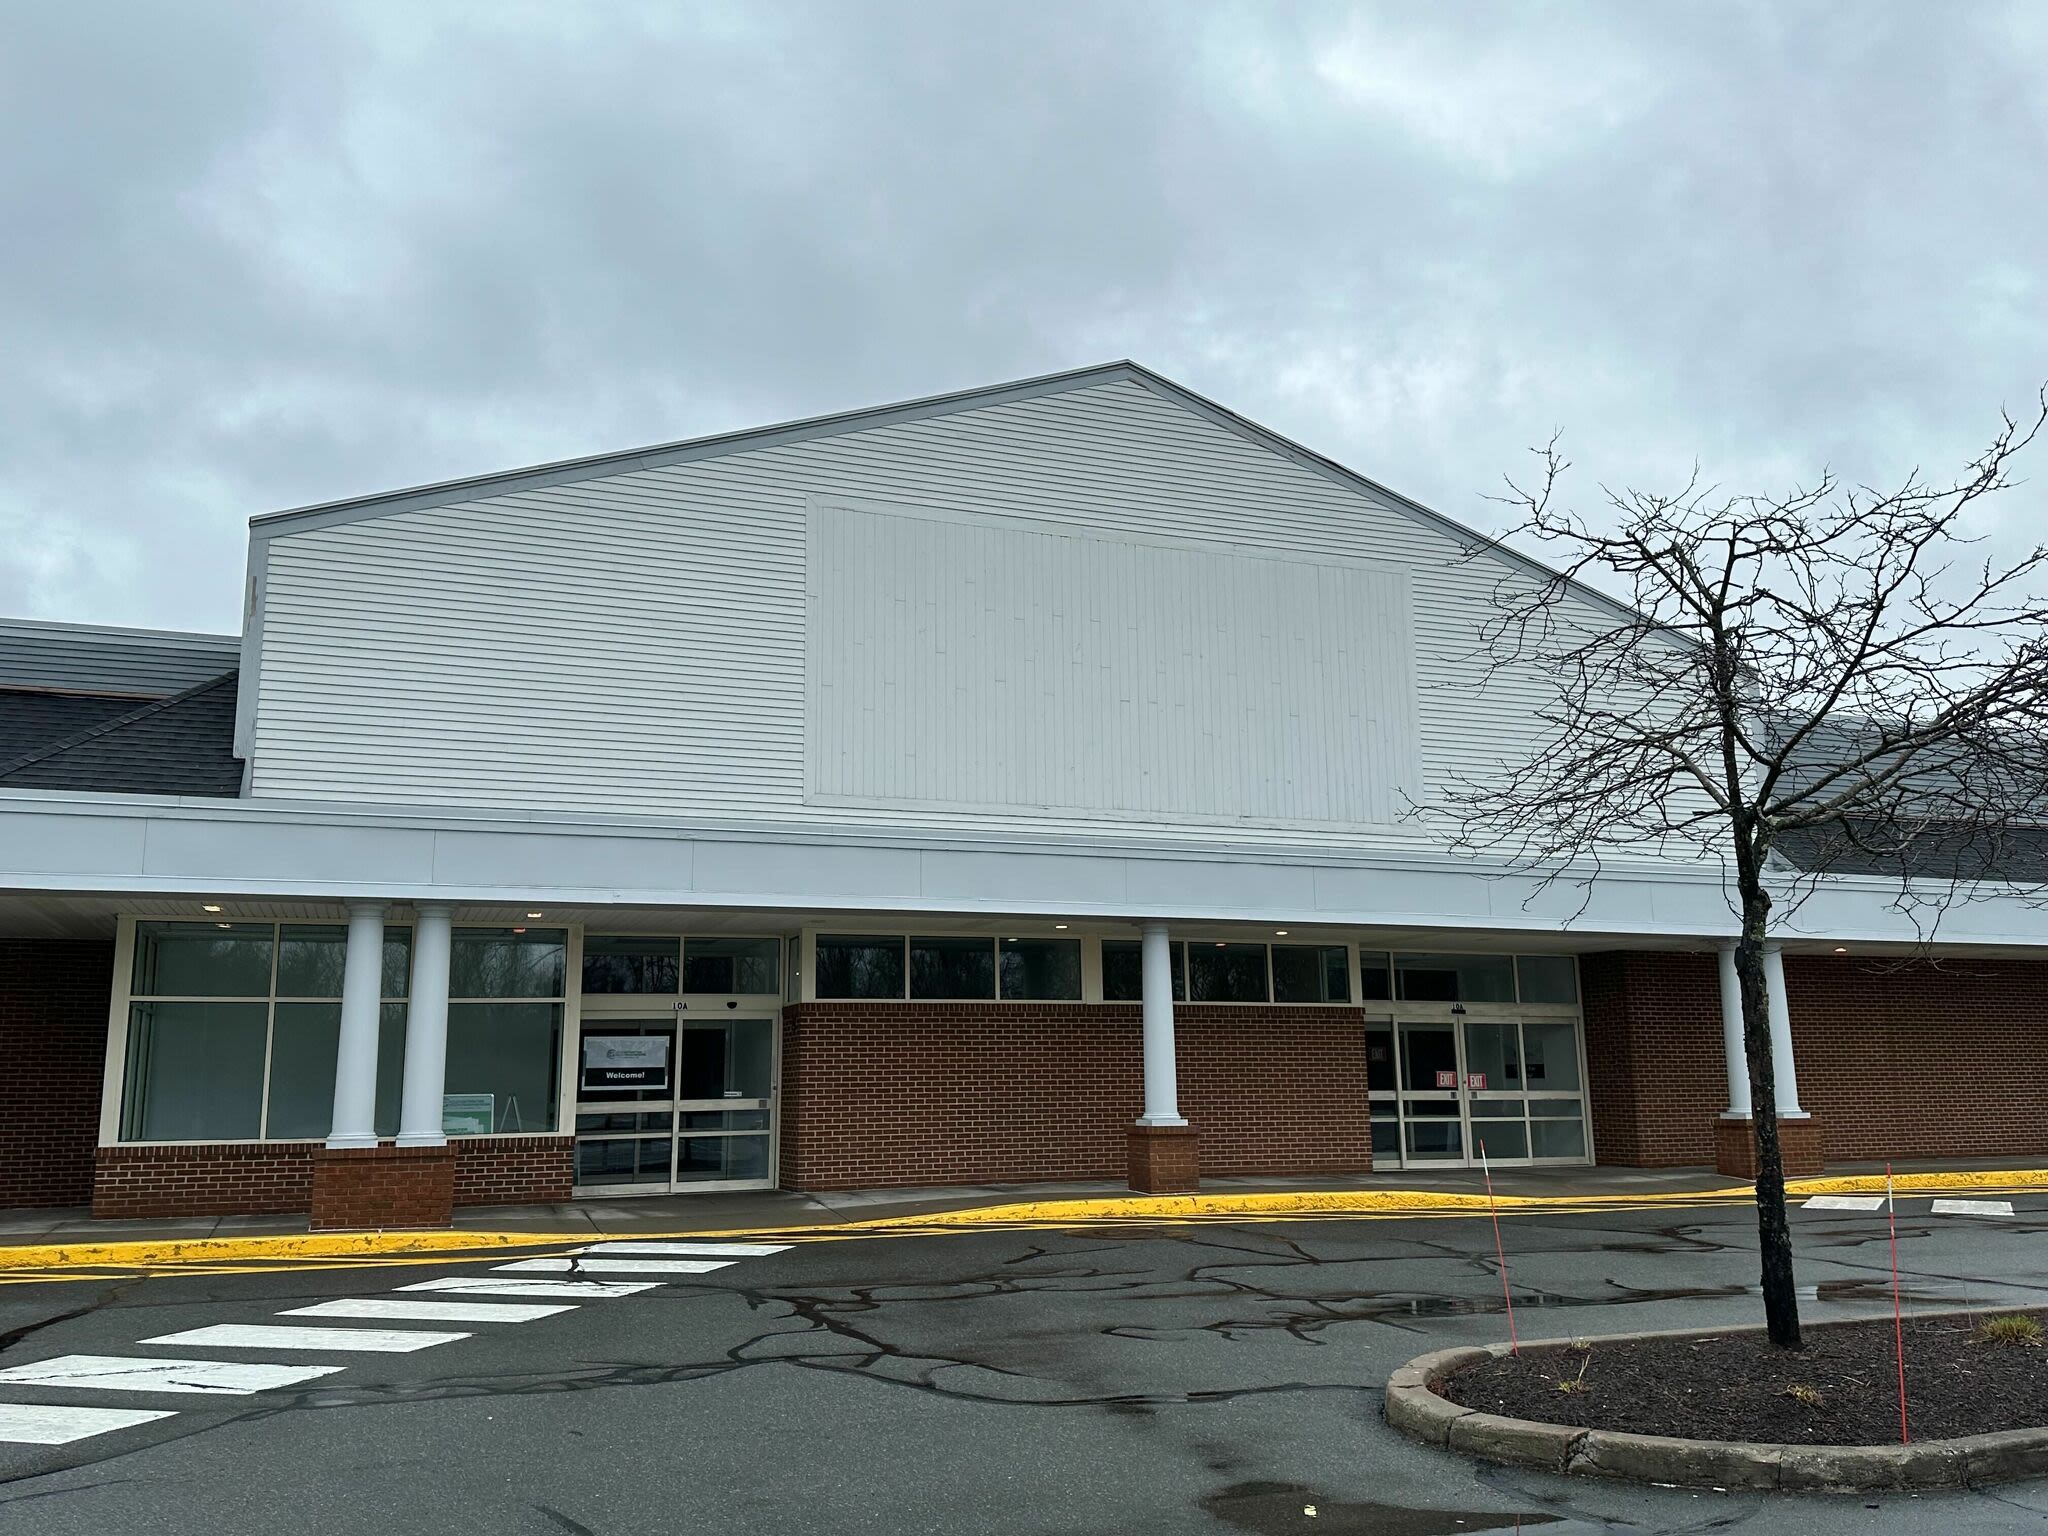 Vernon approves the town's first indoor pickleball courts for a nearly vacant plaza on Route 30